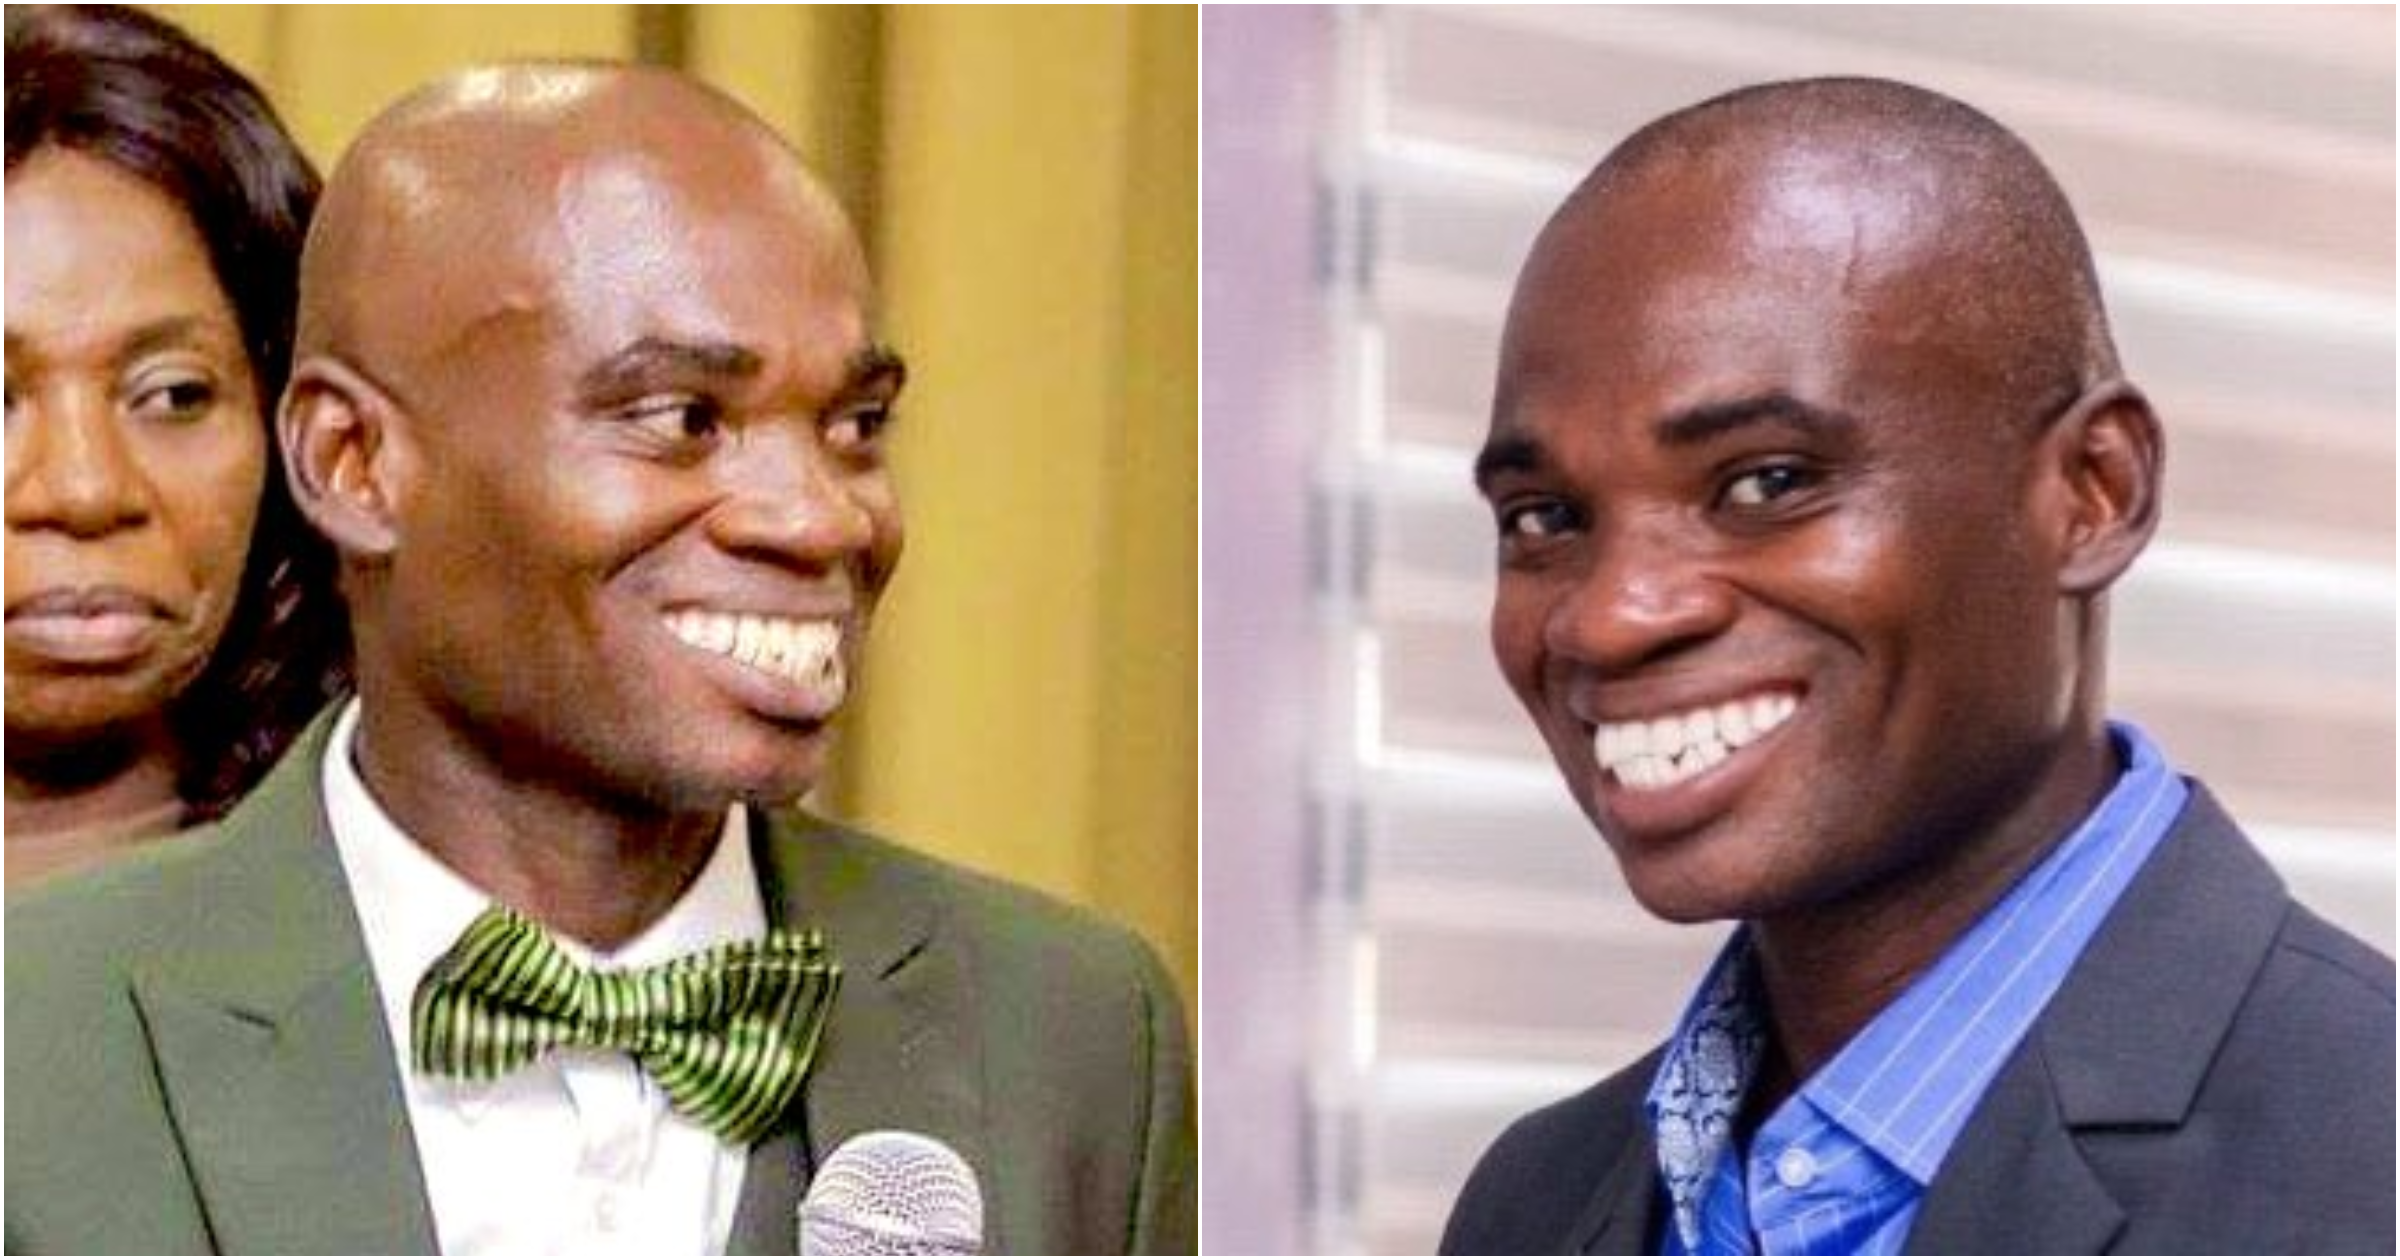 Dr UN: Real name, age, school, and other facts about Kwame Fordjour of fake Kofi Annan awards fame